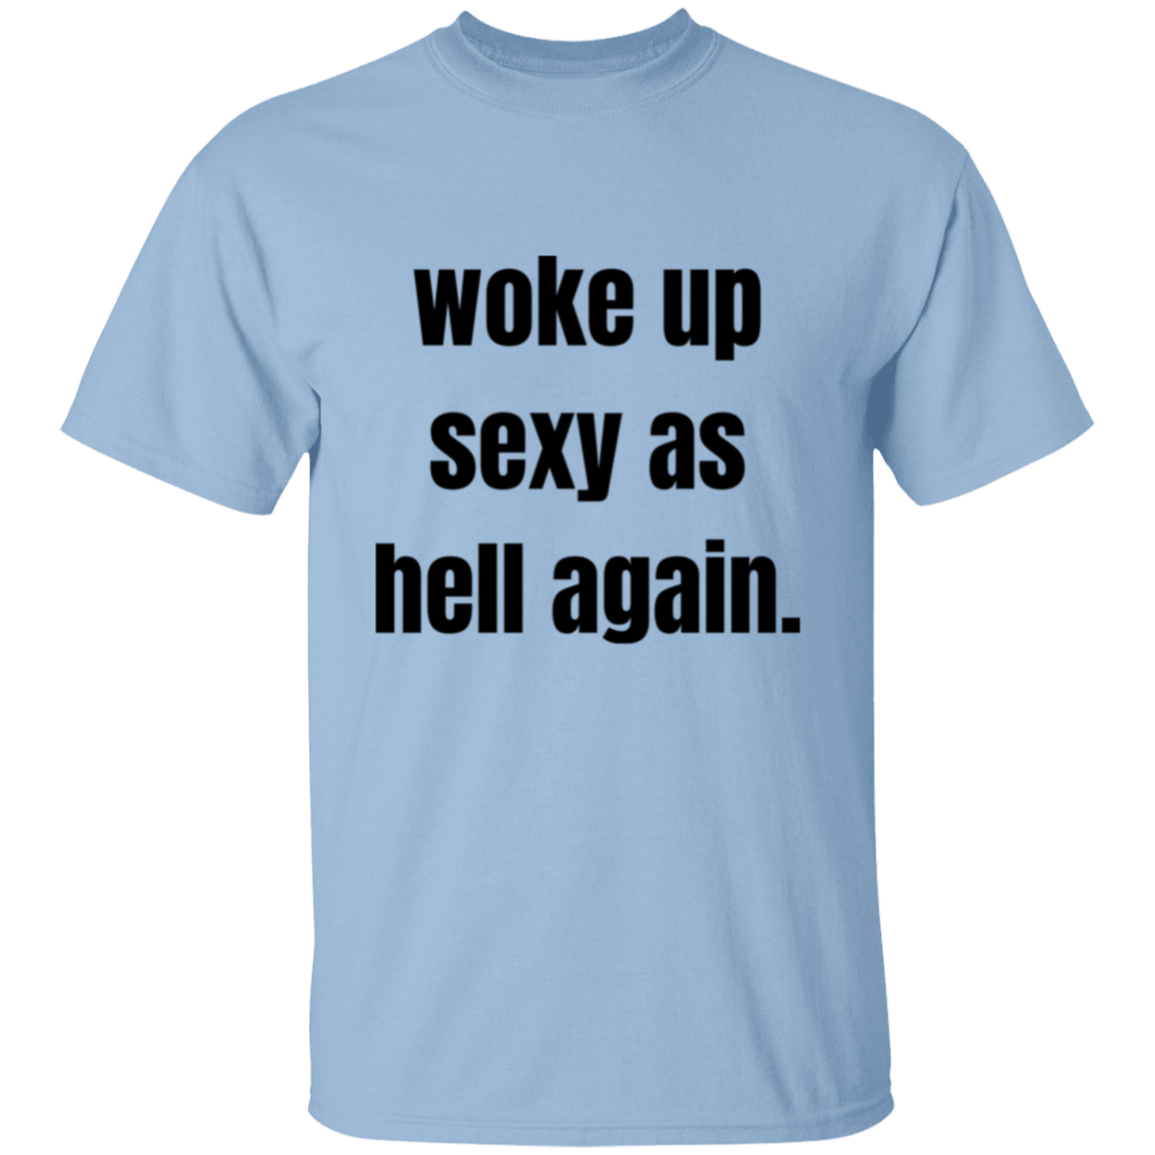 woke up sexy as hell again. T-Shirt